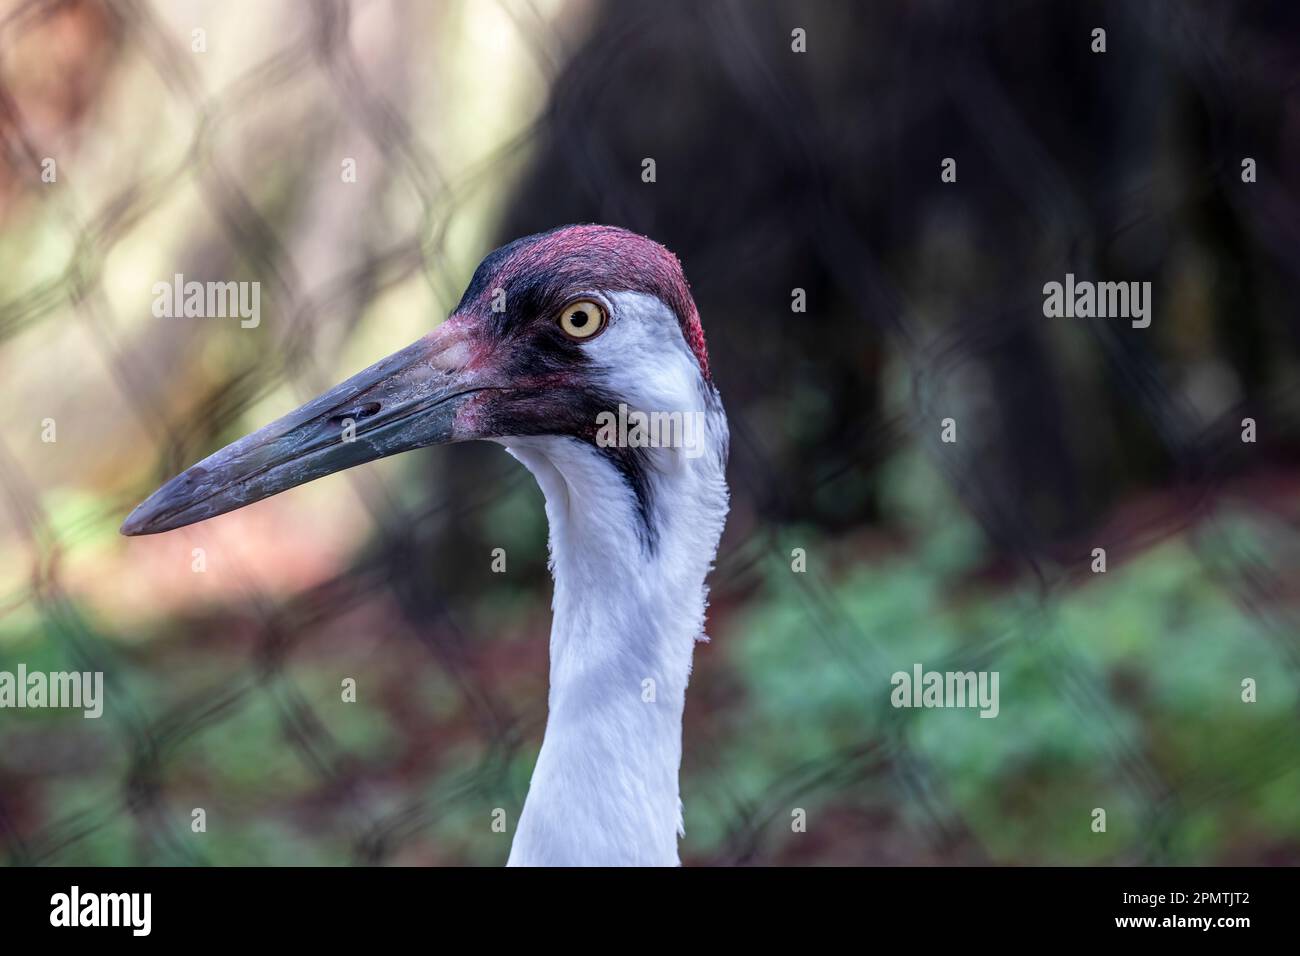 The whooping crane (Grus americana) is the tallest North American bird, named for its whooping sound. It is an endangered crane species. Stock Photo